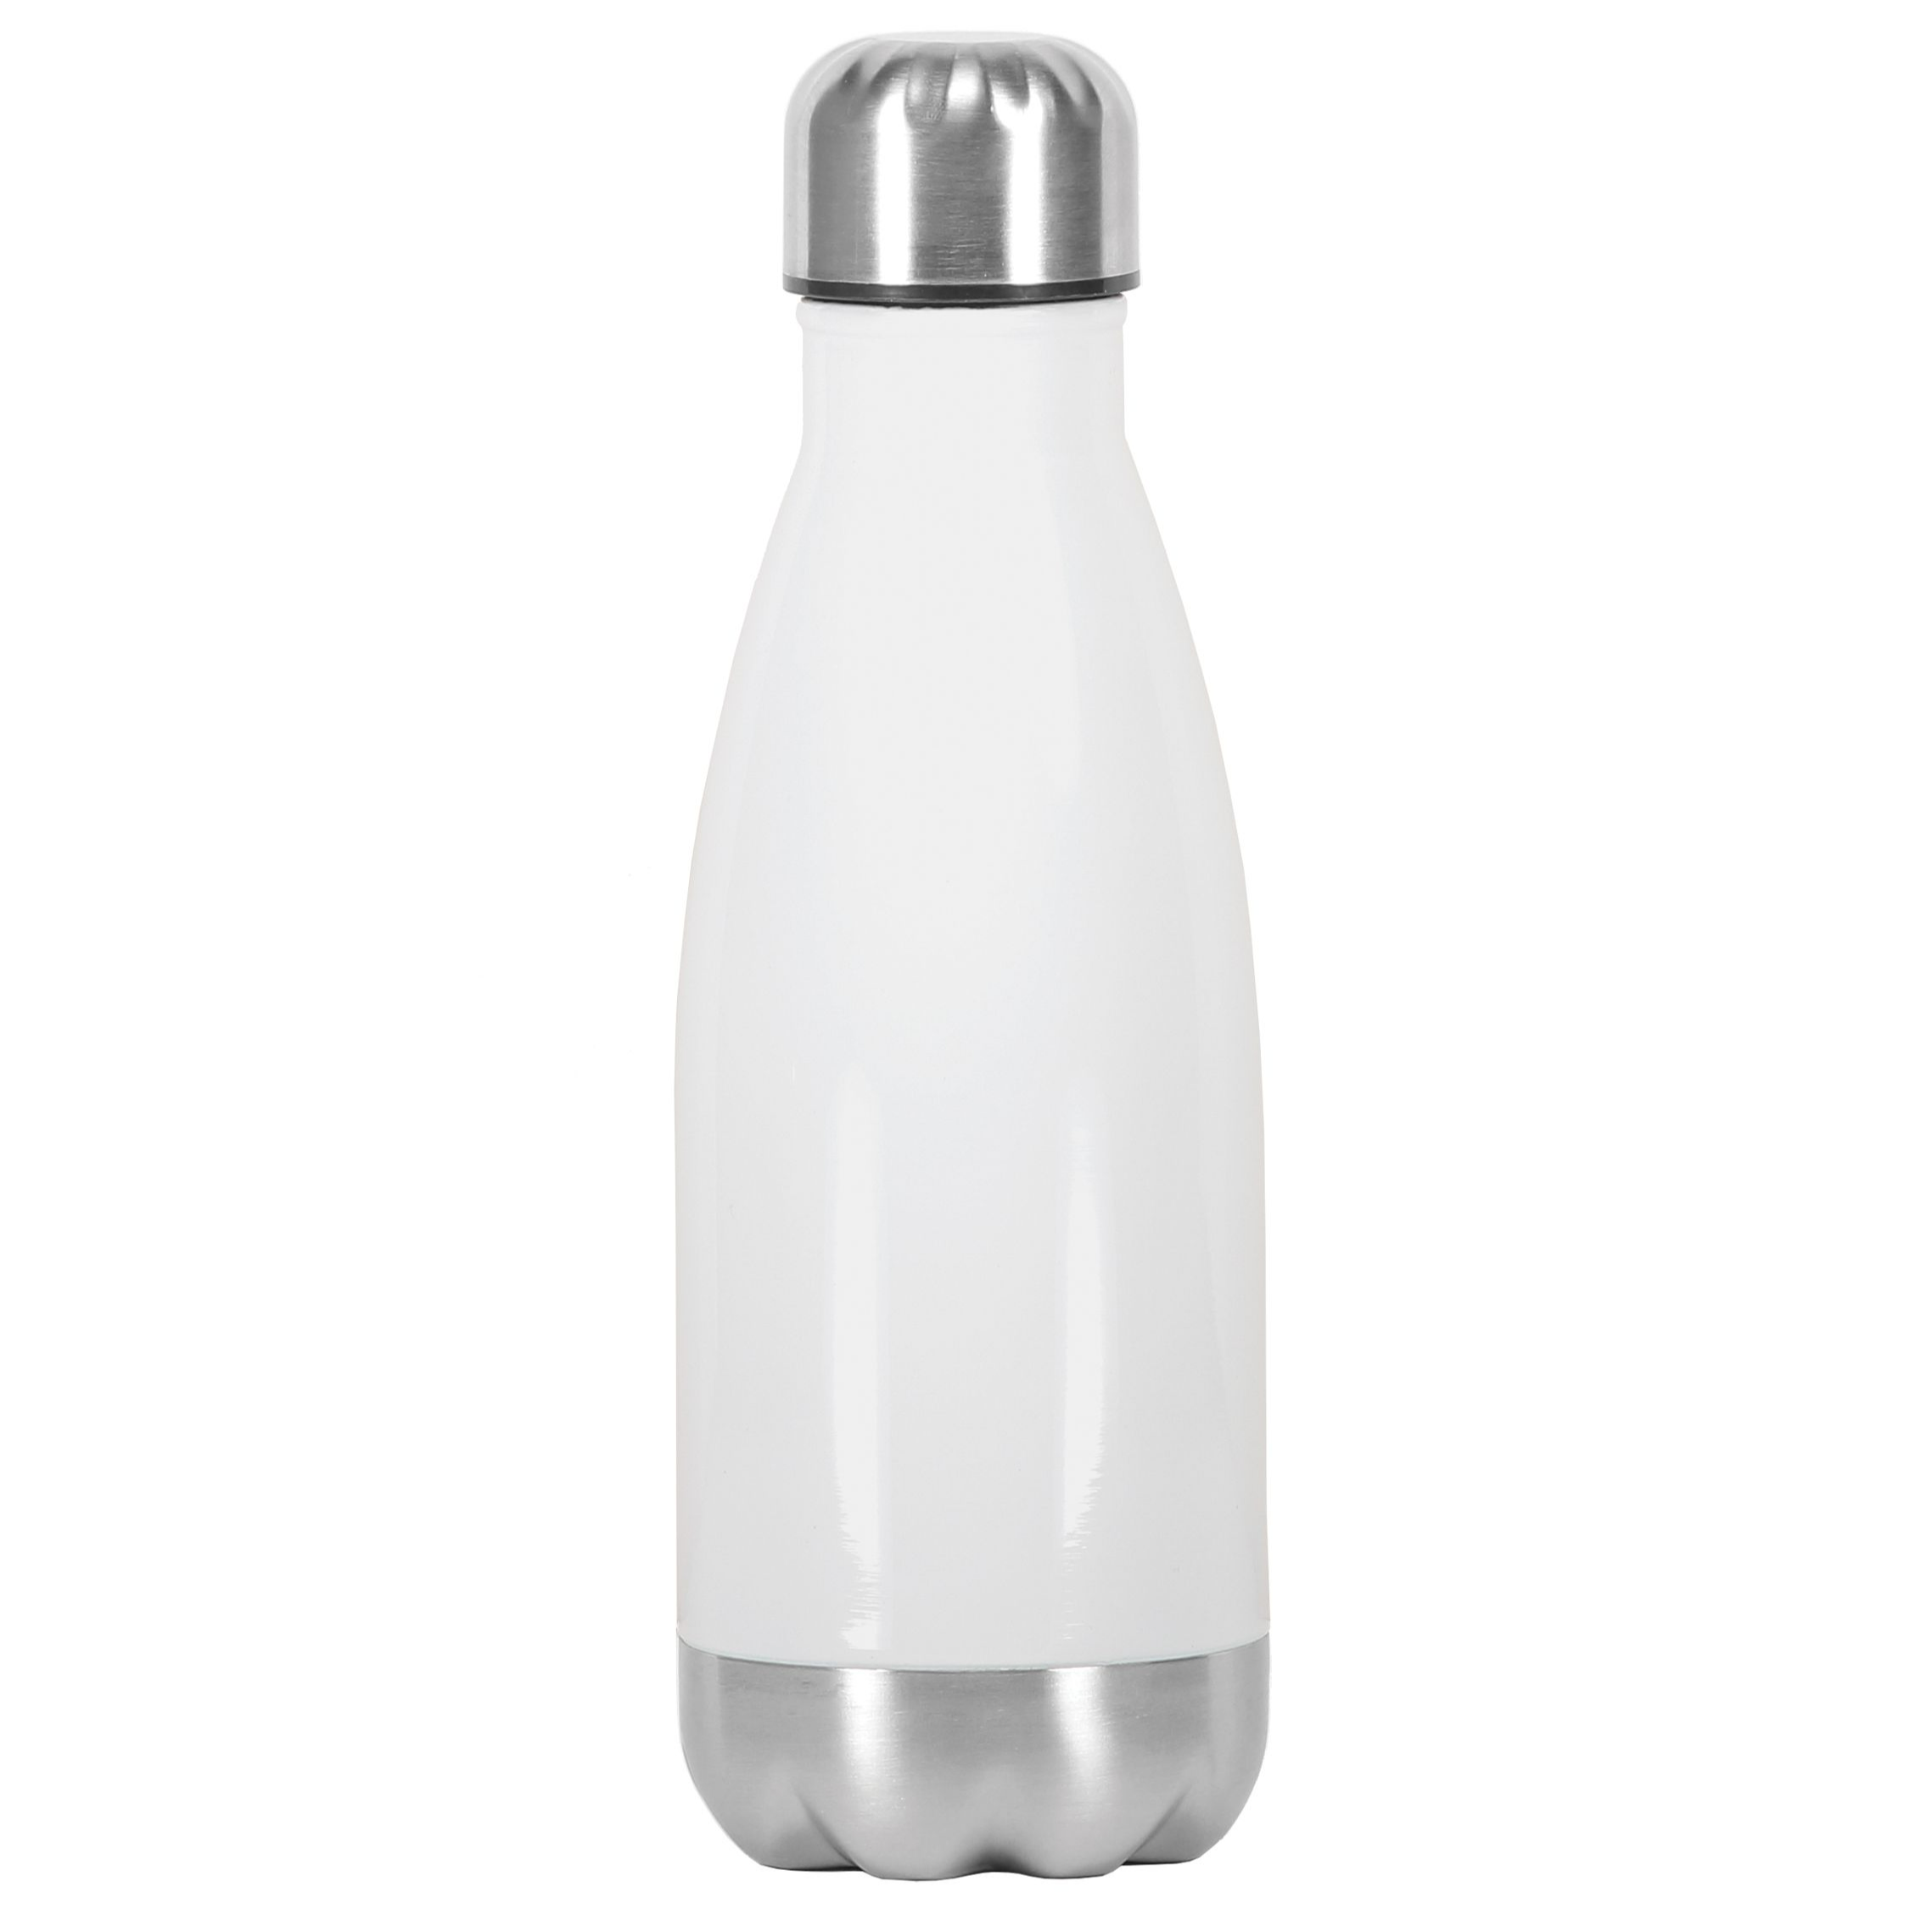 His Fight Is My Fight Diabetes Awareness Stainless Steel Insulated Water Bottle